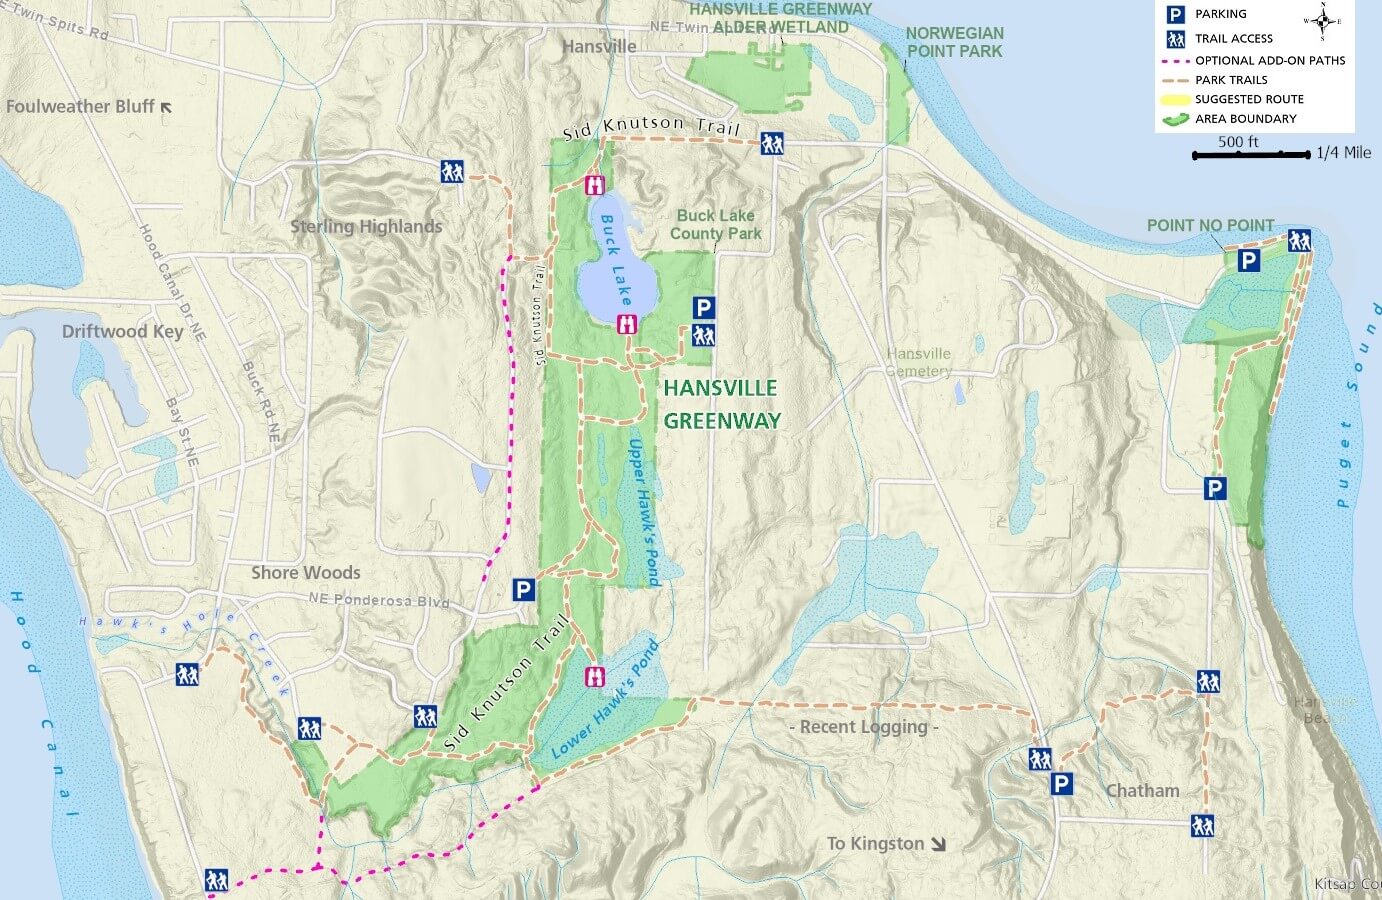 Point No Point & Hansville Greenway Trail Map - Overview